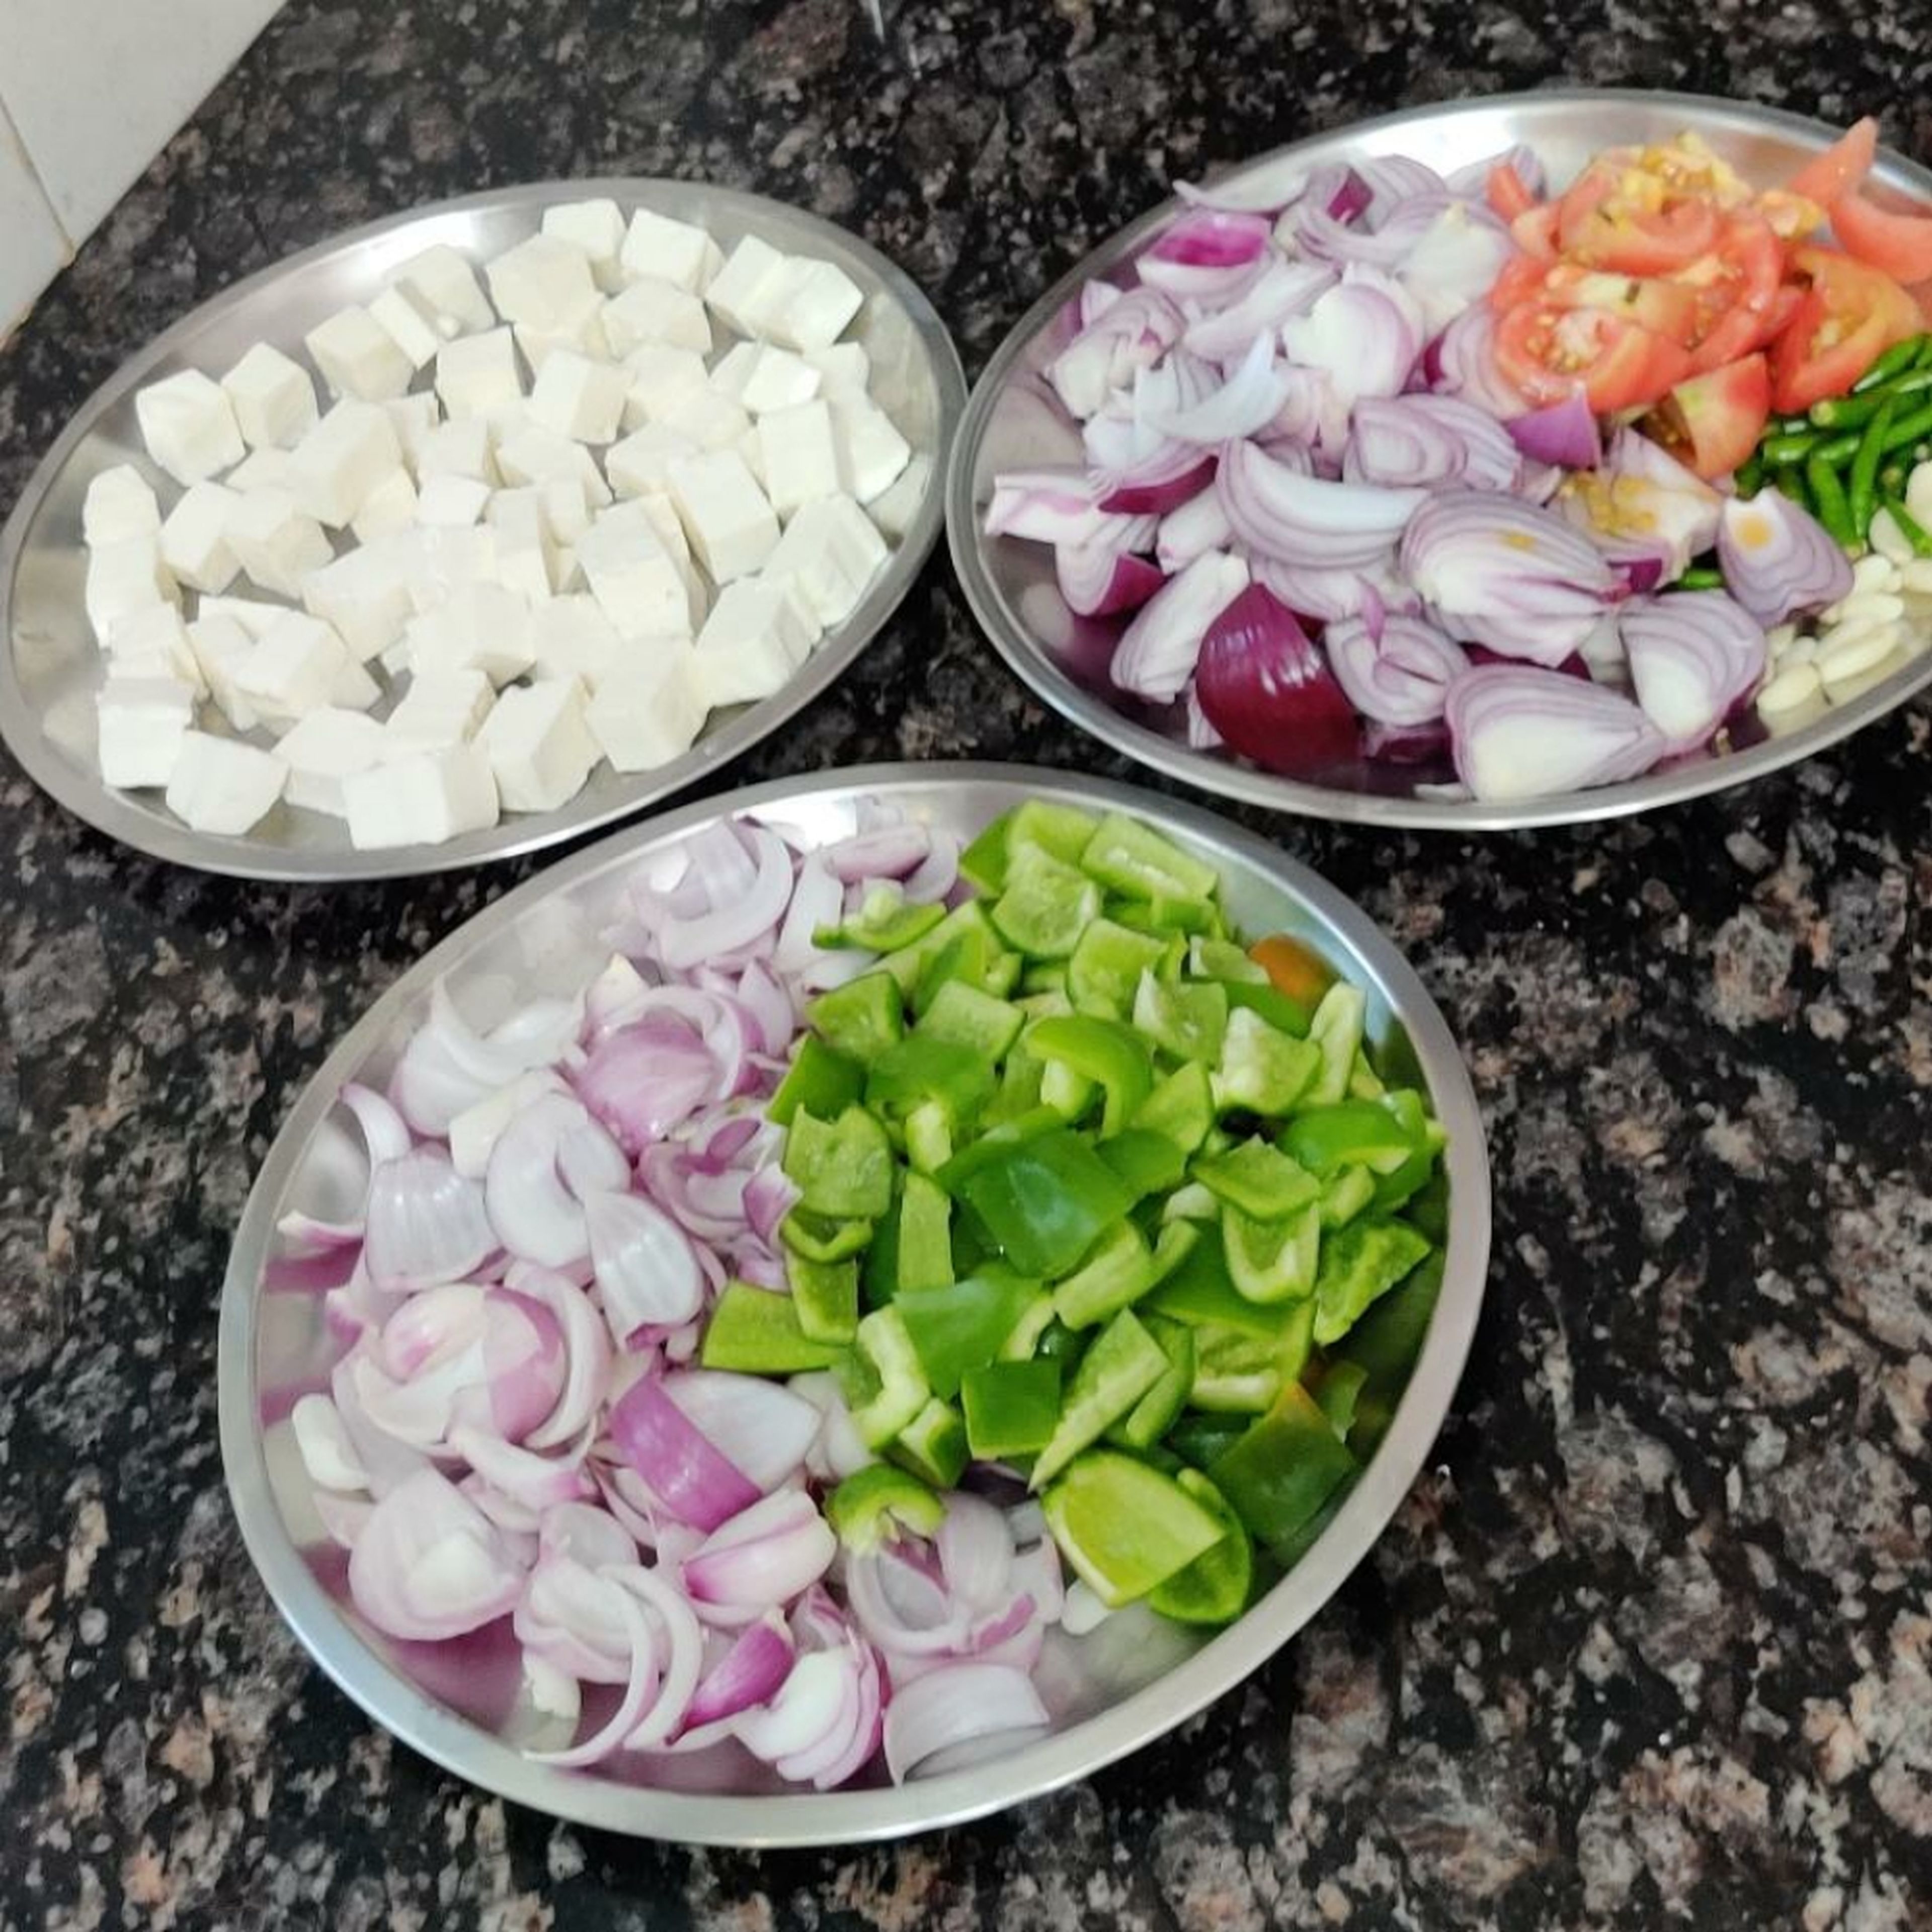 Cut onions, tomatoes, green chillies, garlic, capsicum and paneer.